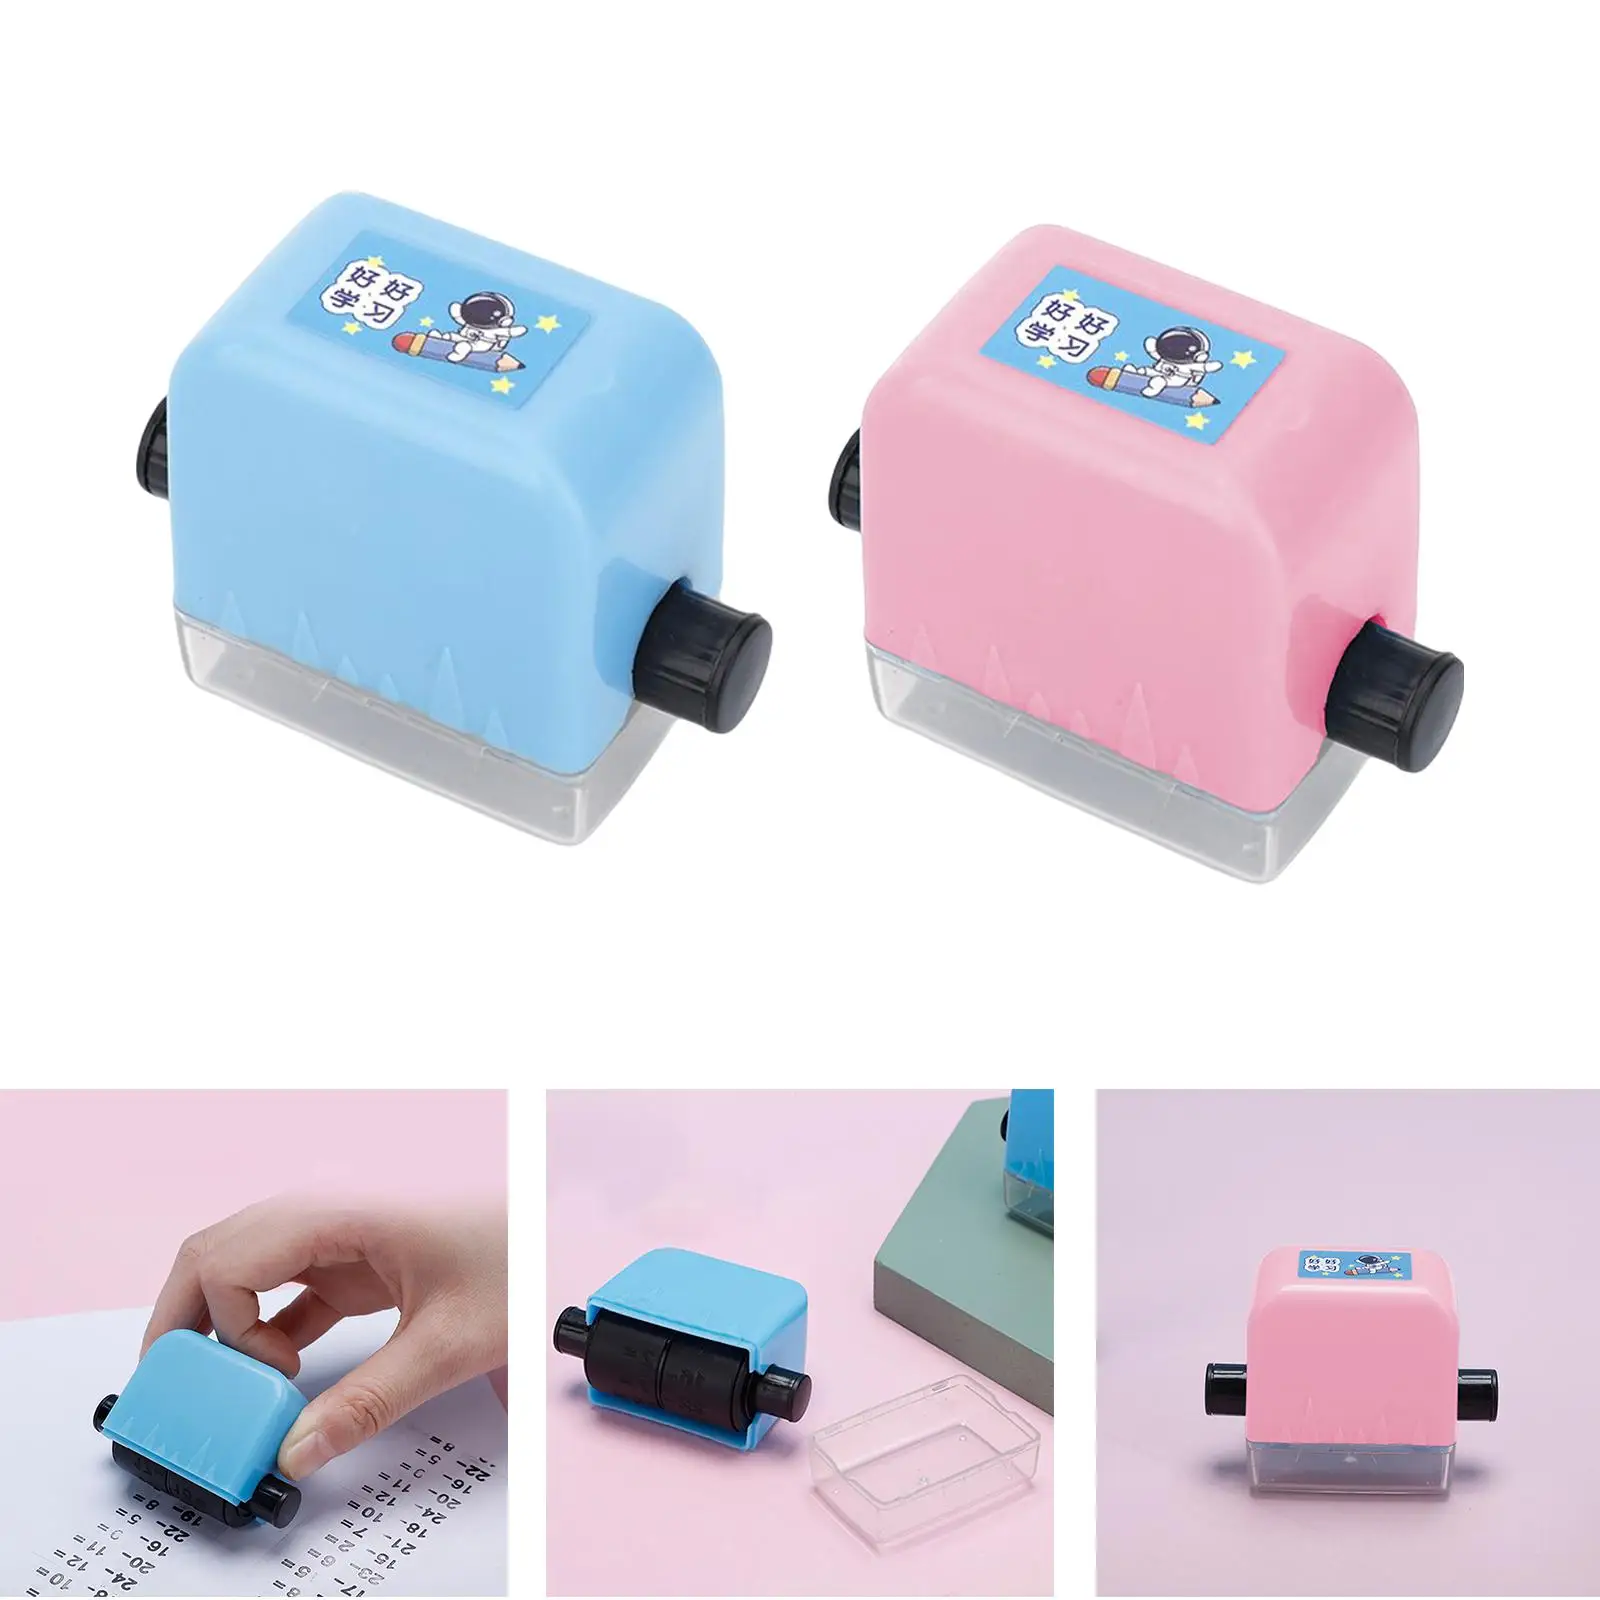 Roller Digital Teaching Stamp Math Questions Calculation Portable Interesting Number Rolling Stamp for Students Elementary